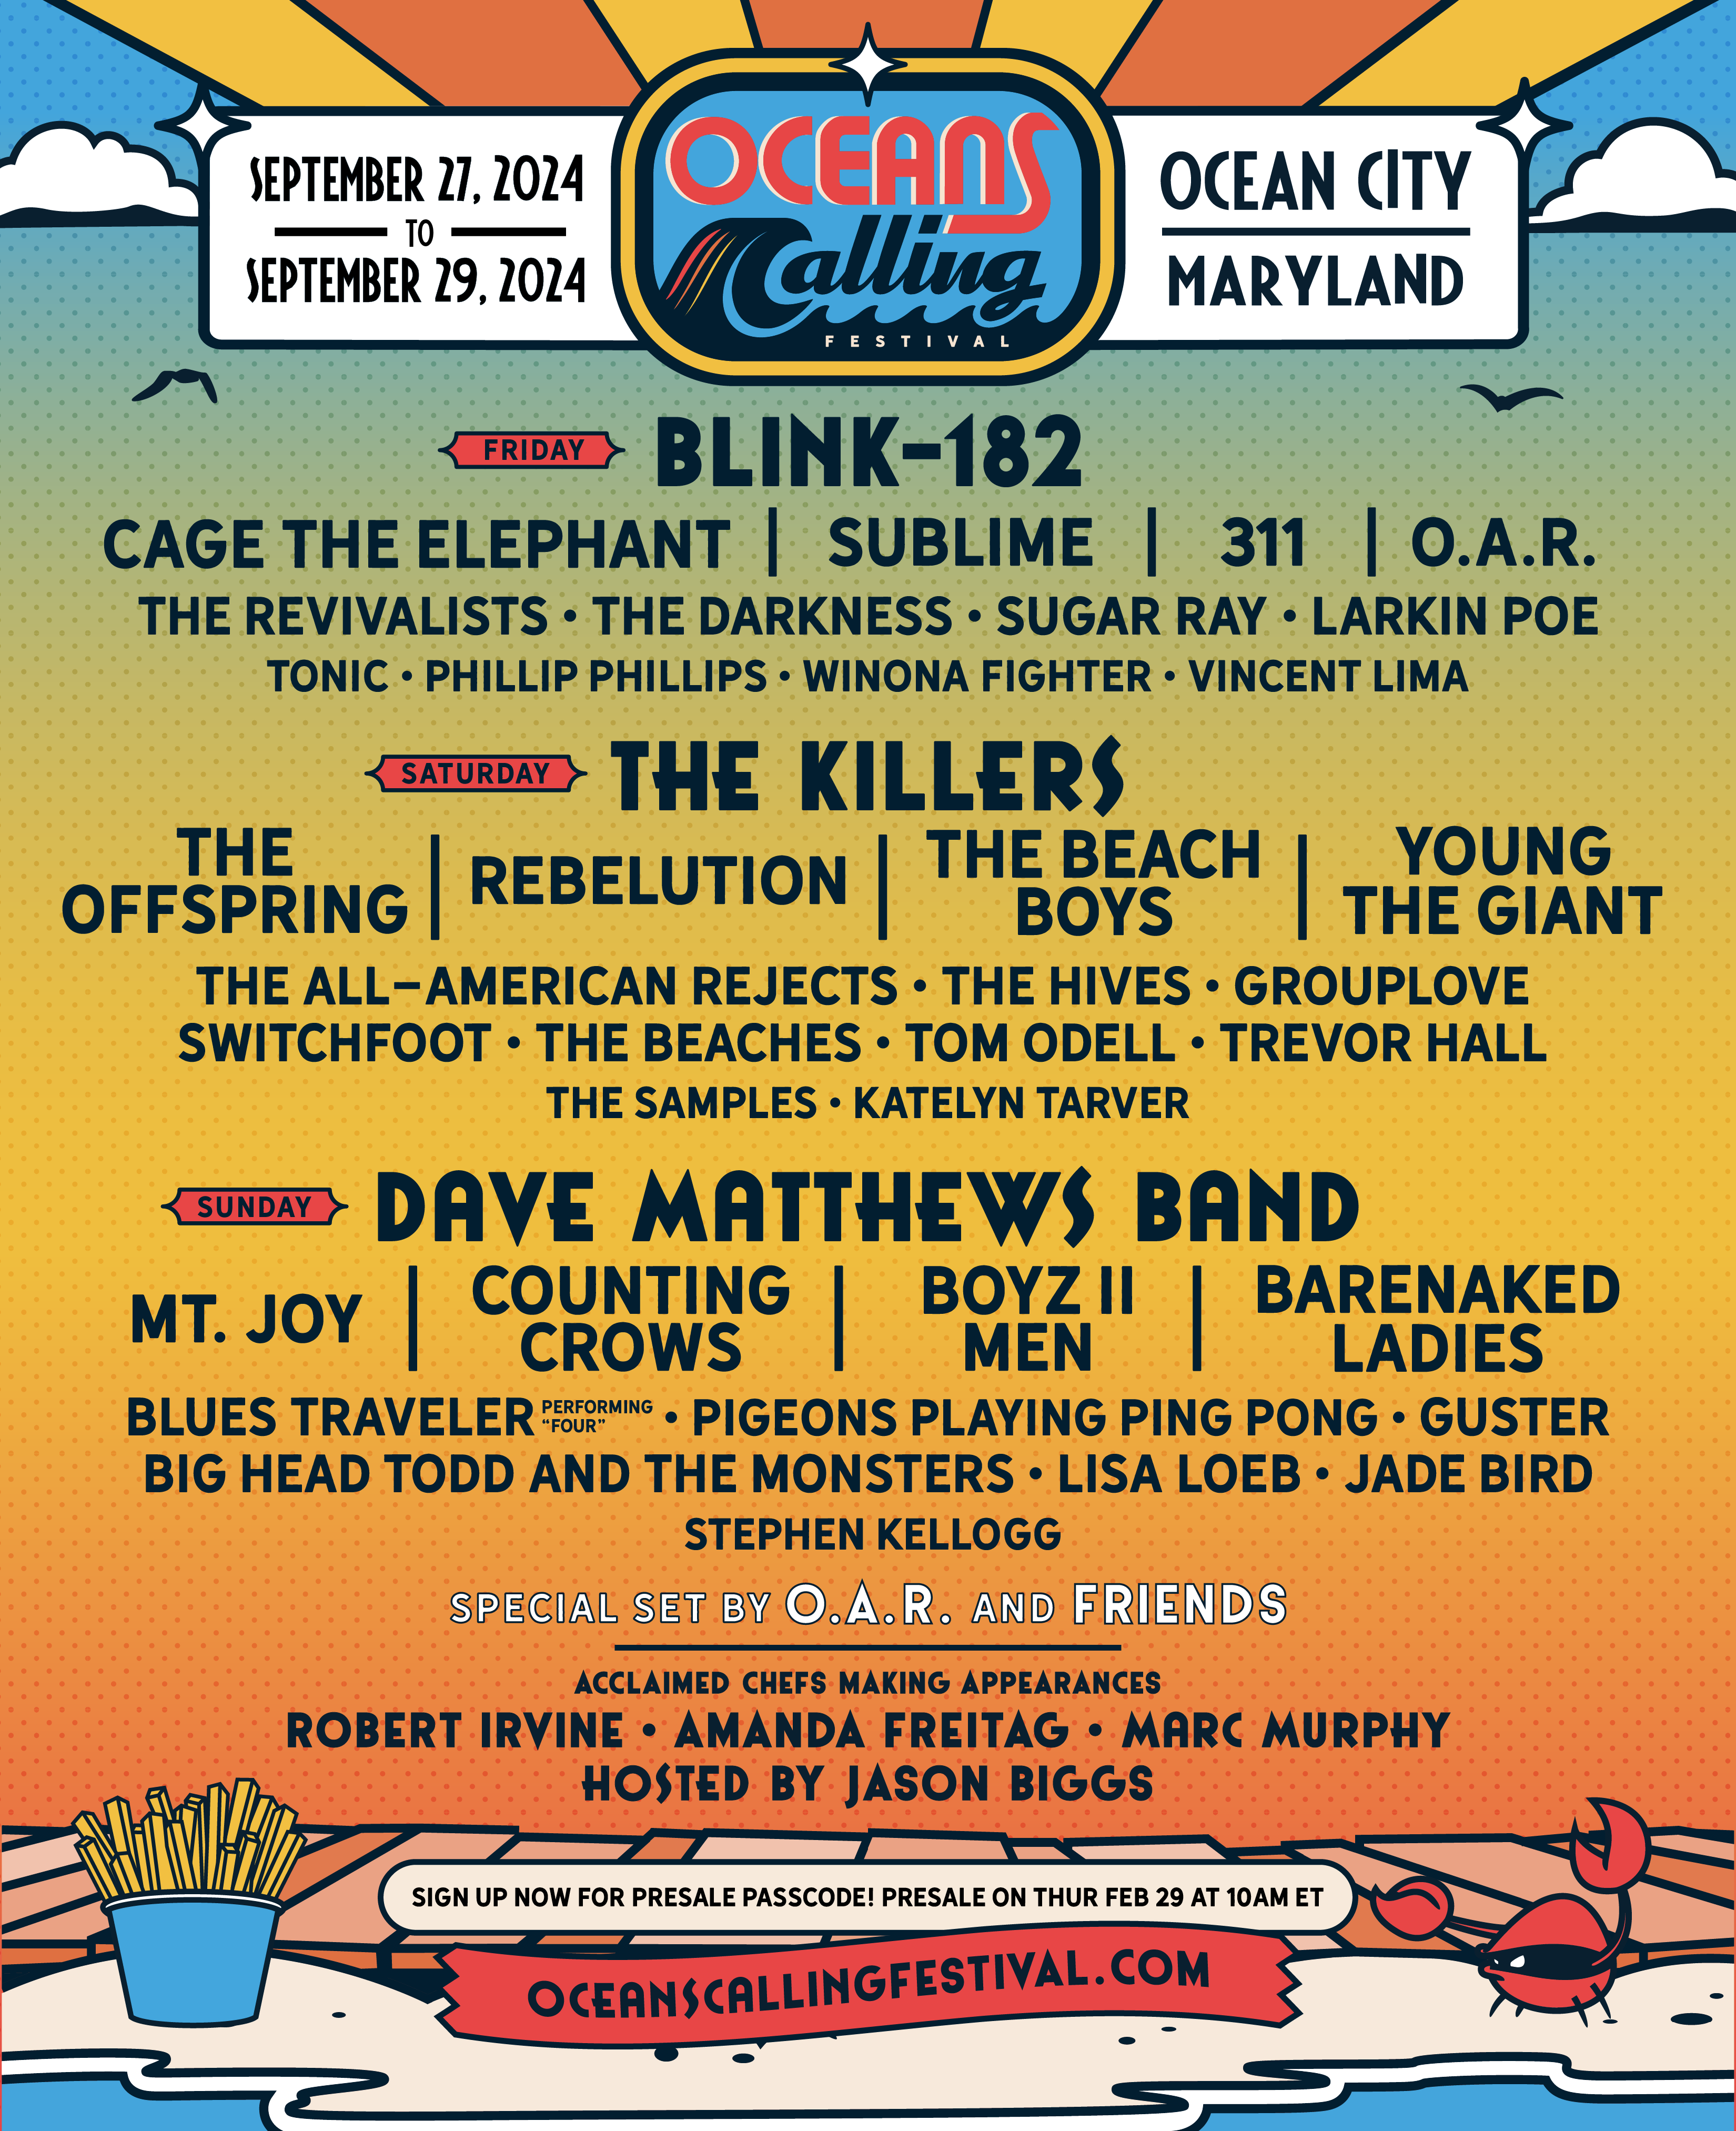 Oceans Calling Festival Unveils Artist Lineup for Second Presentation: O.A.R., The Killers, Dave Matthews Band and More